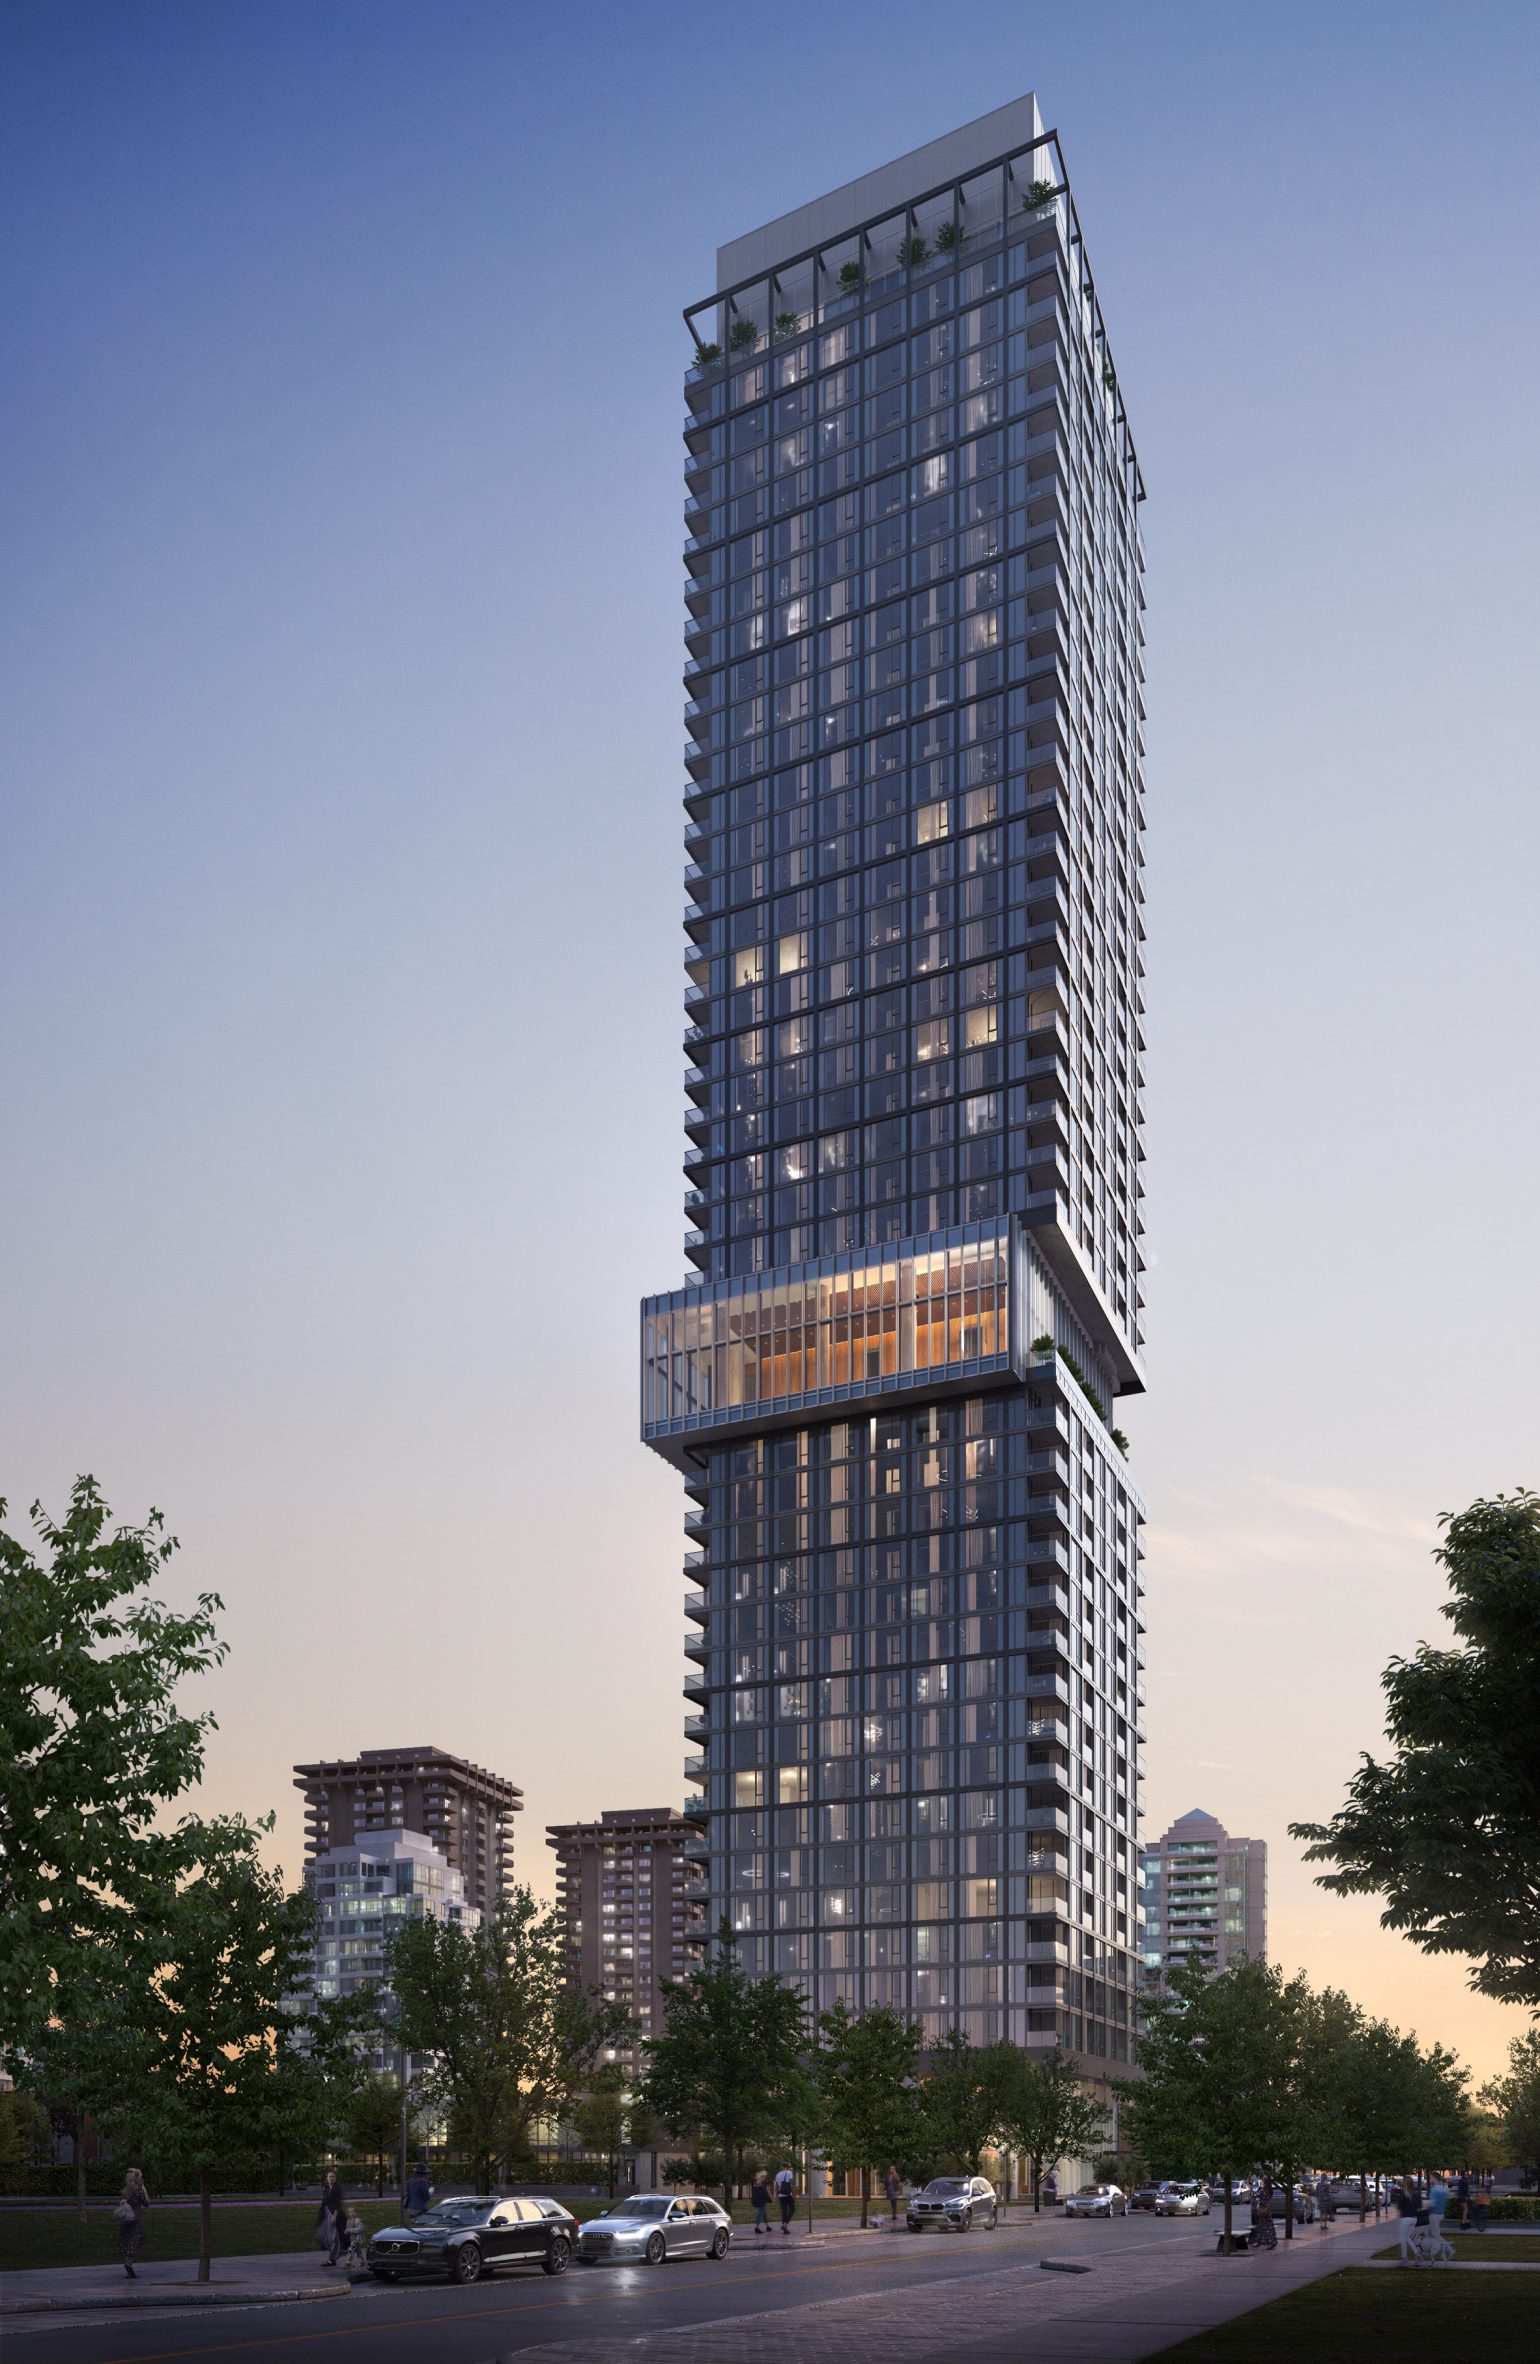 Exterior render of a high rise tower designed by Gensler for Canada